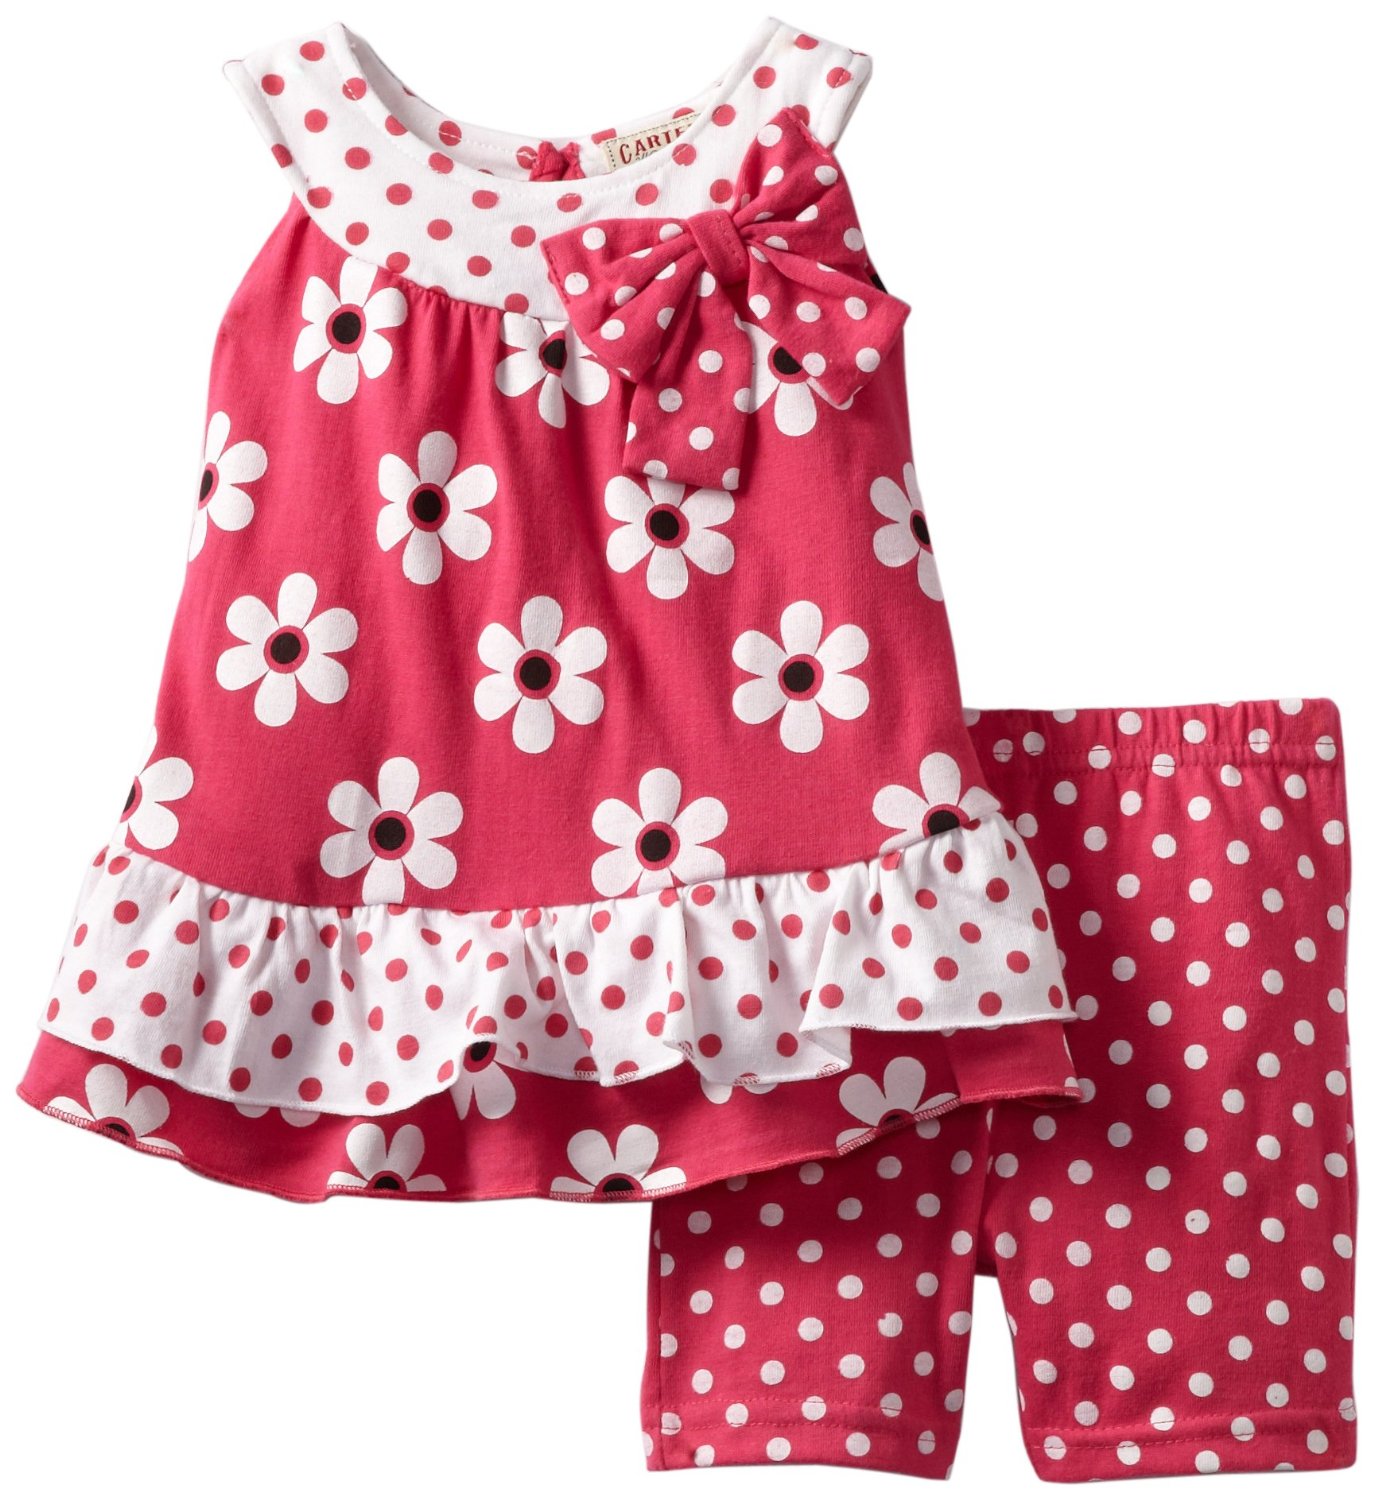 Carter's Watch the Wear Infant 2-Piece Tunic Set    $11.00 （50%off）